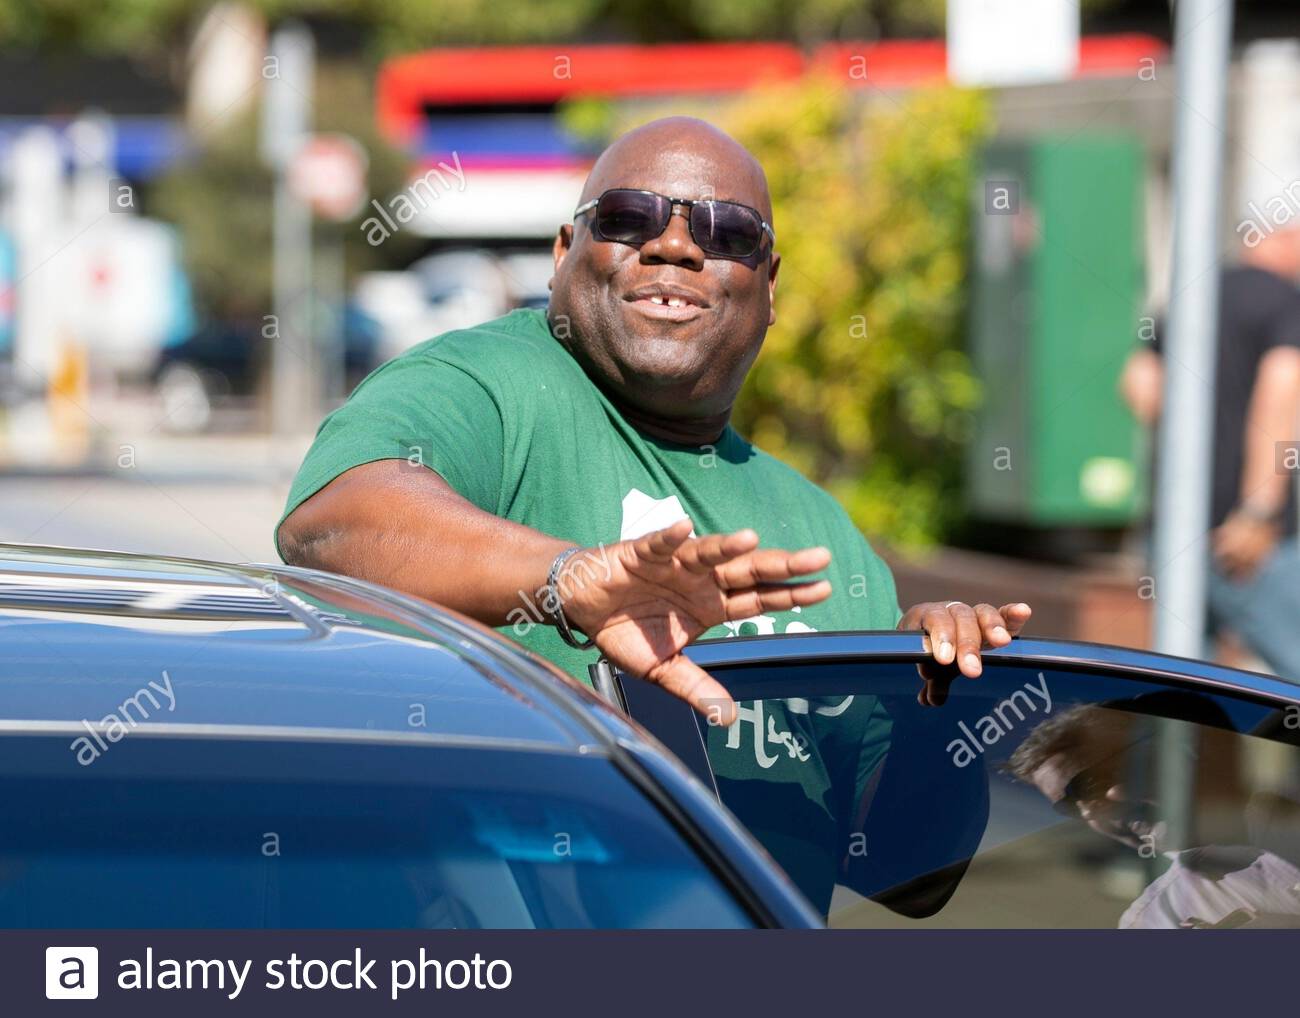 Melbourne, AUSTRALIA - *EXCLUSIVE* - DJ and techno record producer Carl Cox  is unfazed by Coronavirus as he arrives at Melbourne Airport and heads into  compulsory Australian self-isolation for 14 days. Pictured: